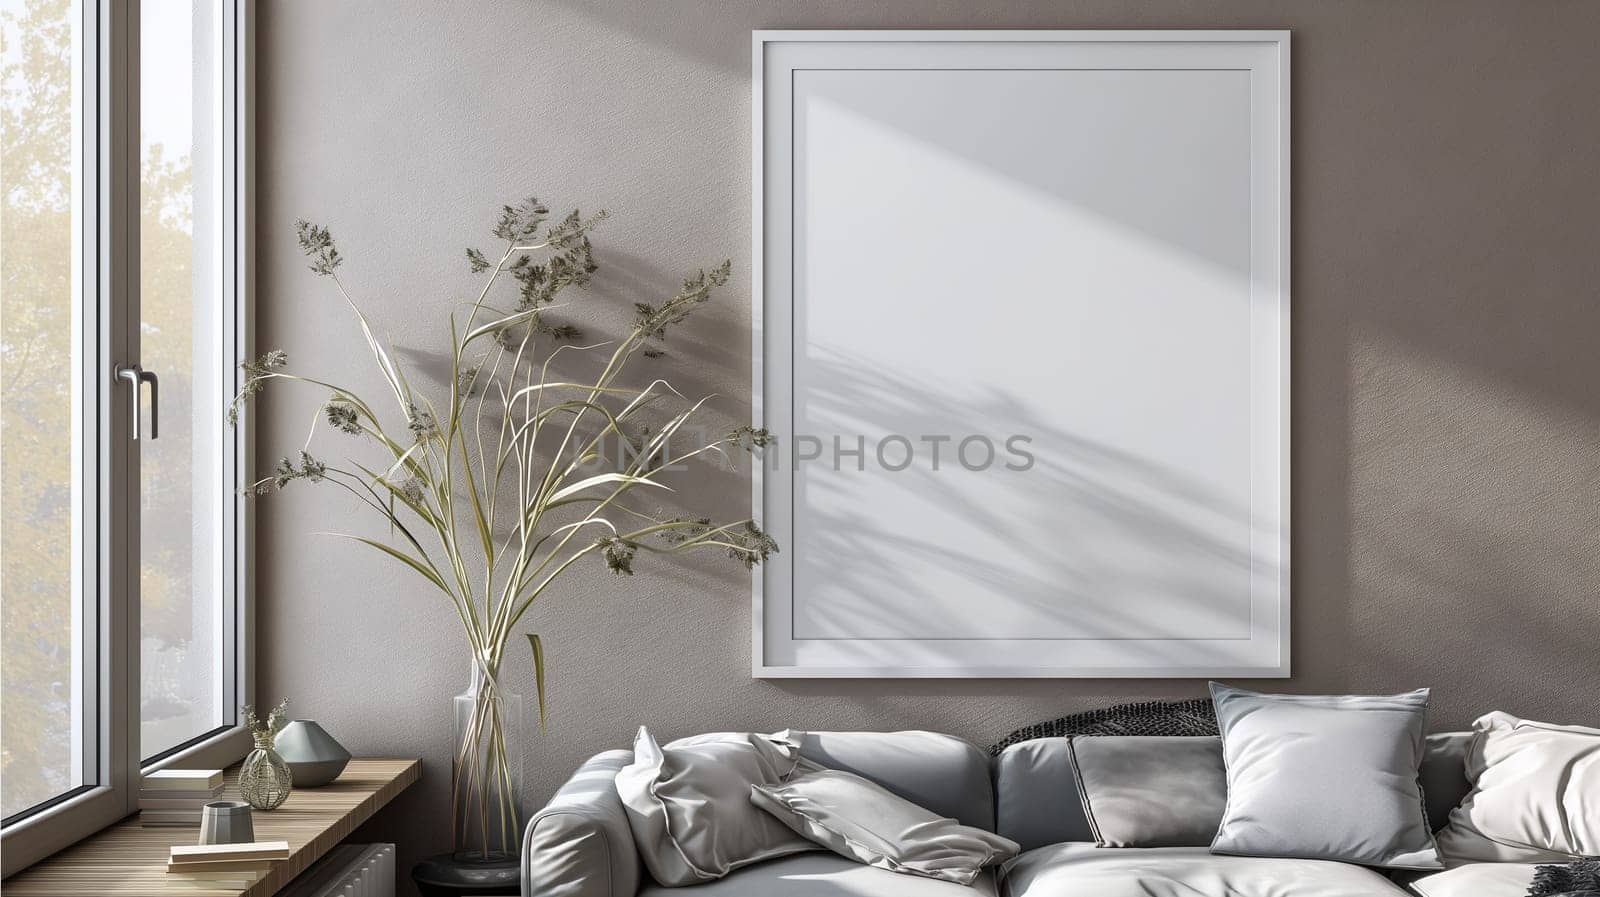 Modern Living Room With Sunlight Casting Shadows on Wall Art by chrisroll